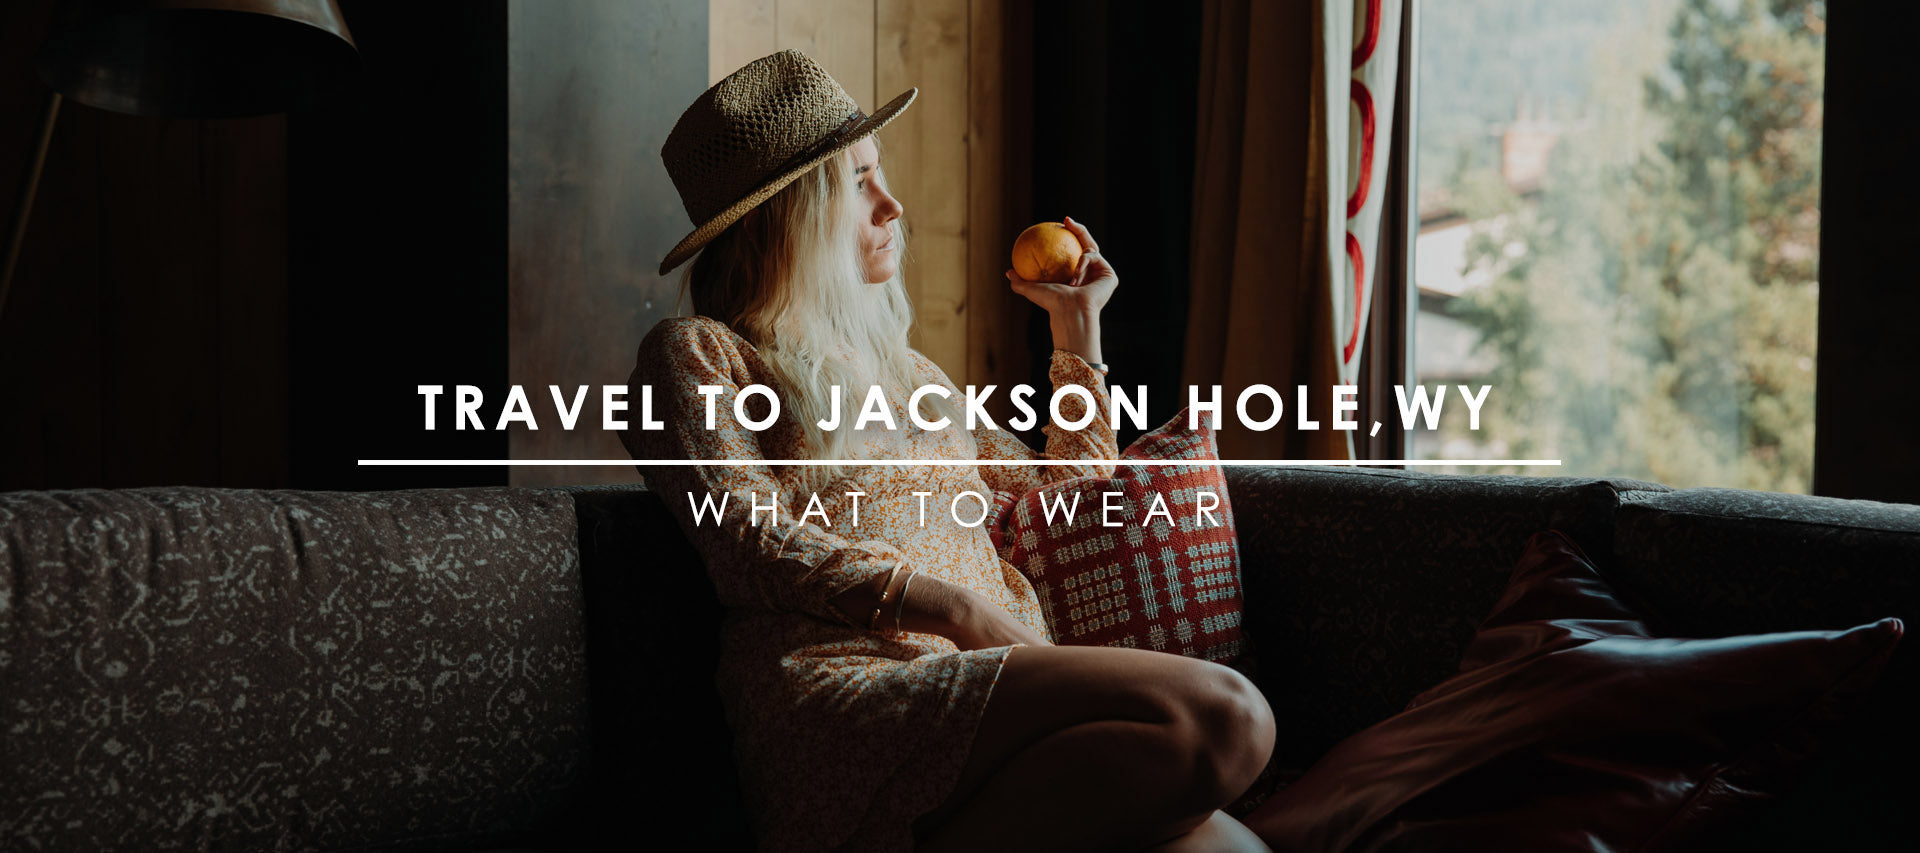 What to Wear in Jackson Hole, Wyoming